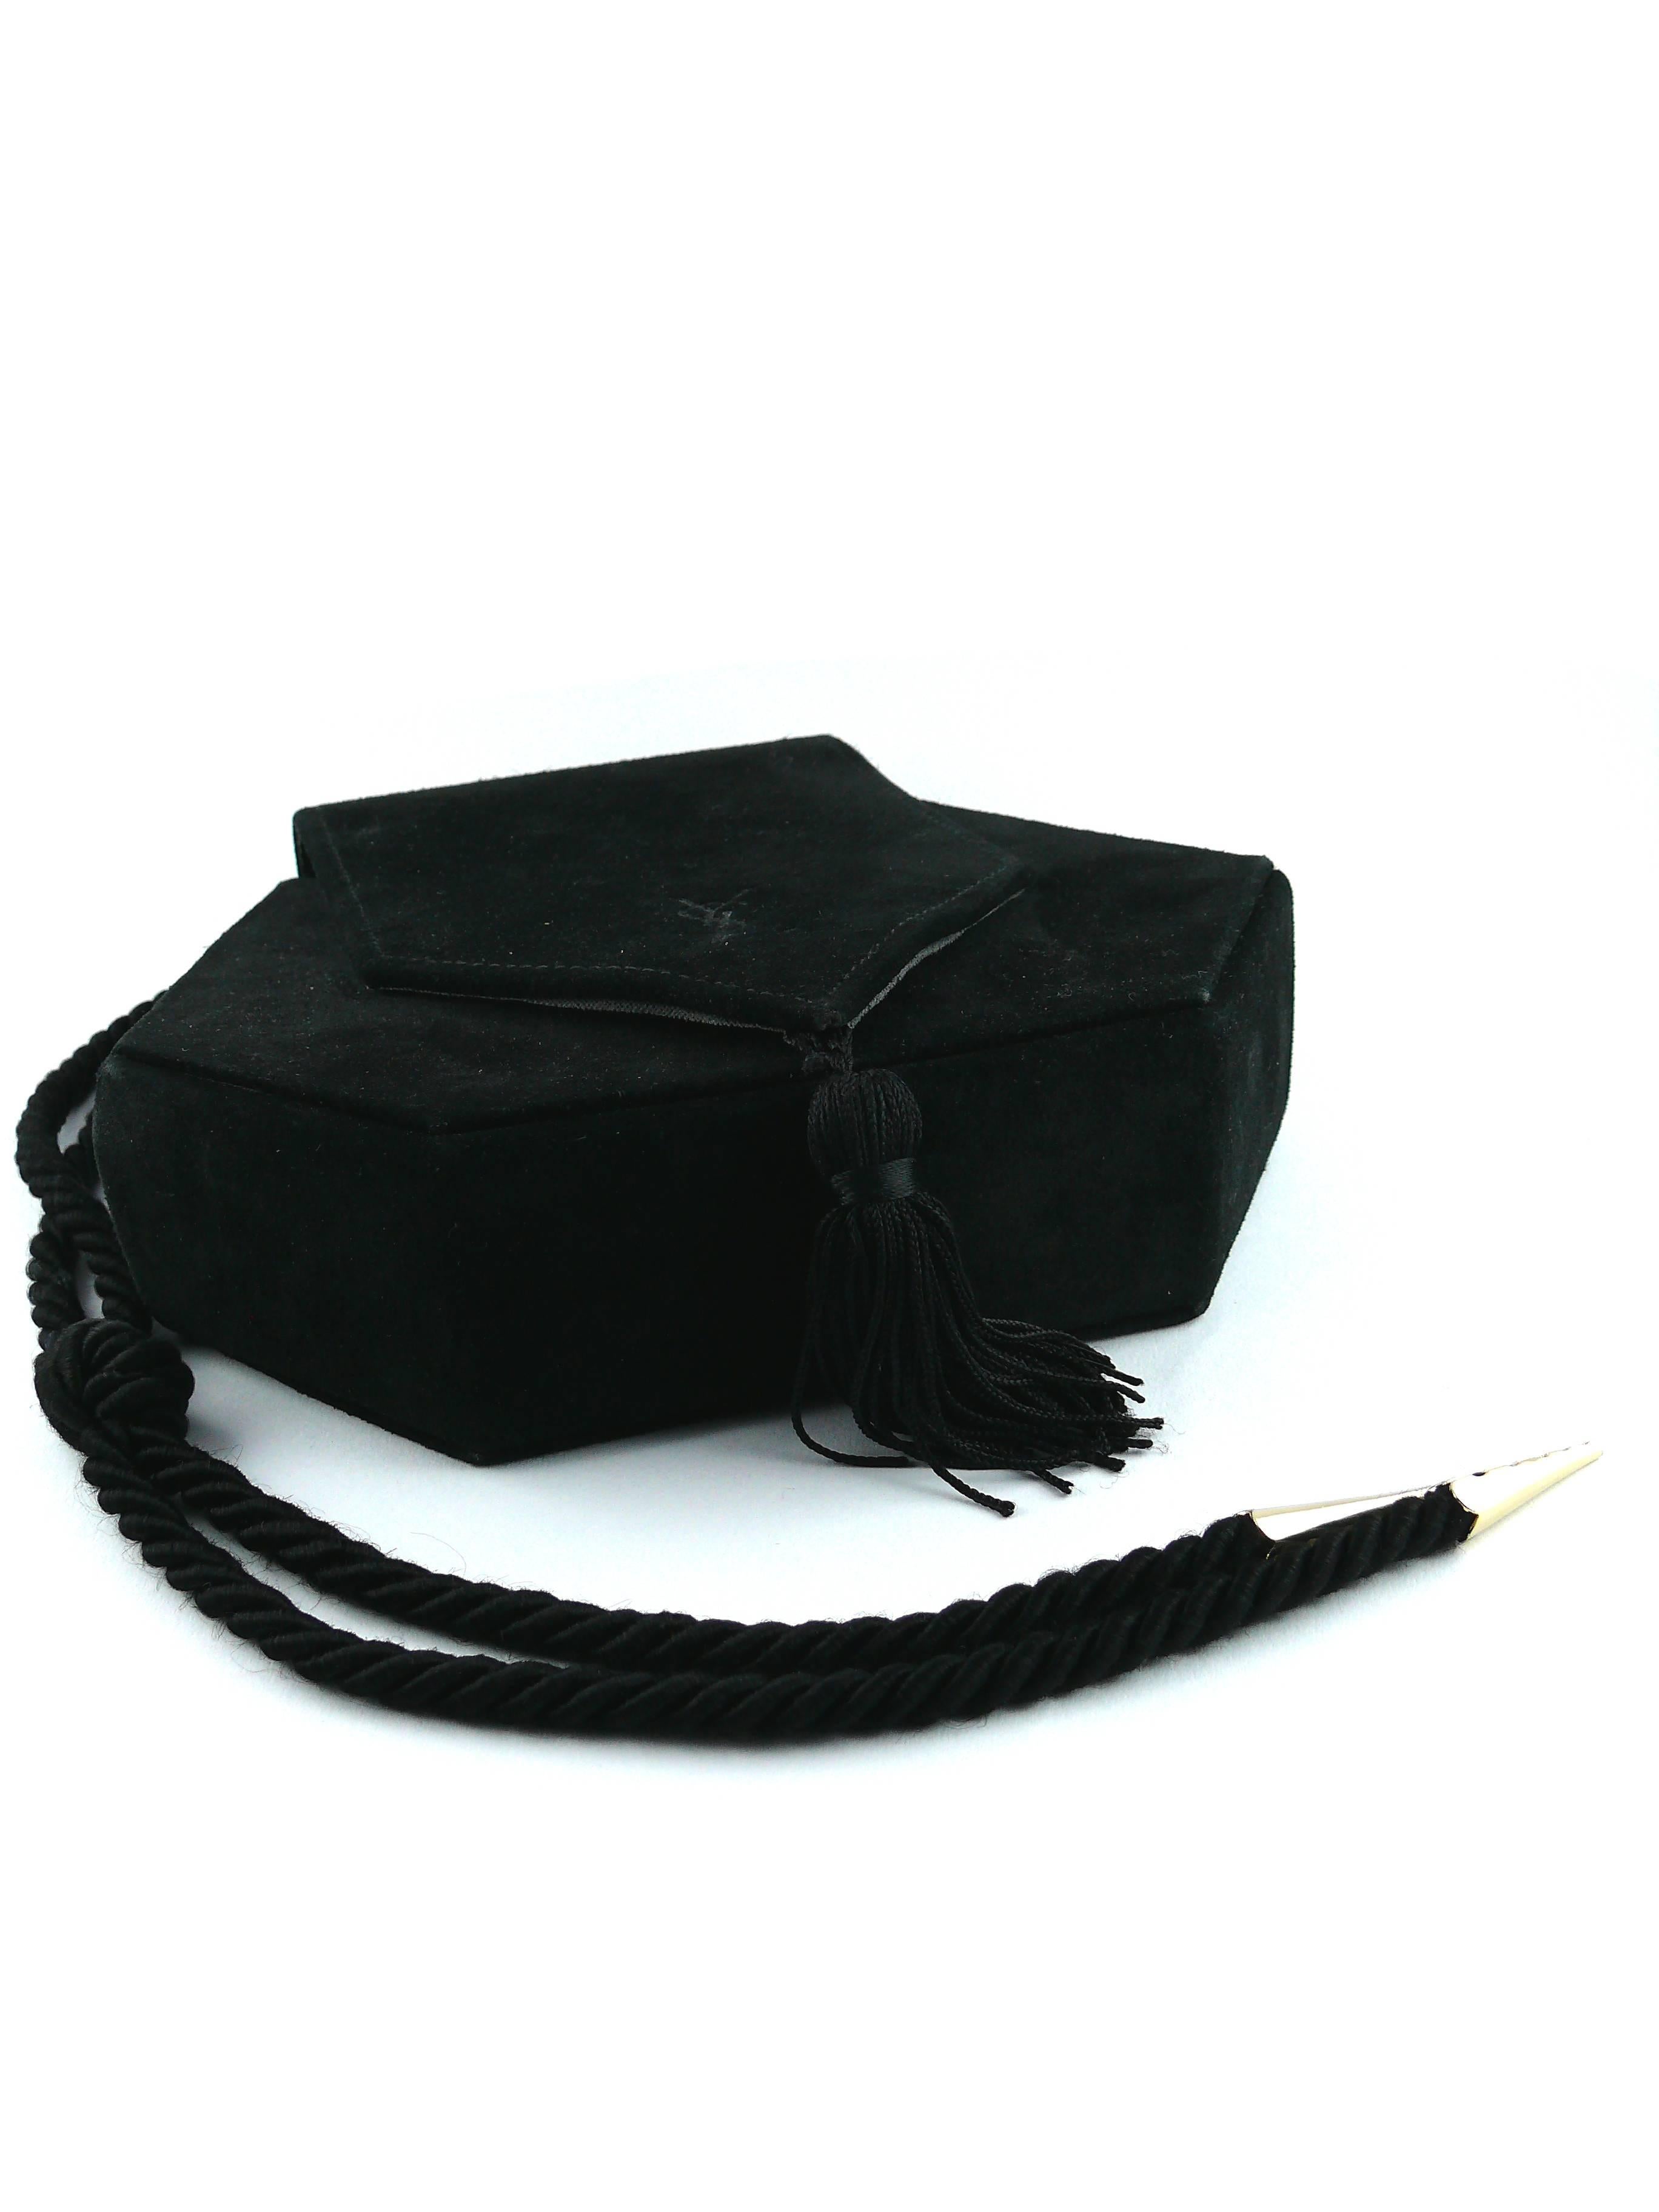 YVES SAINT LAURENT vintage black evening tassel bag purse.

Black suede adorned with a silk tassel.

Braided passementerie straps ending with two gold tone metal cones.  

Adjustable length.

Stamped with the YSL monogram on the flap of the